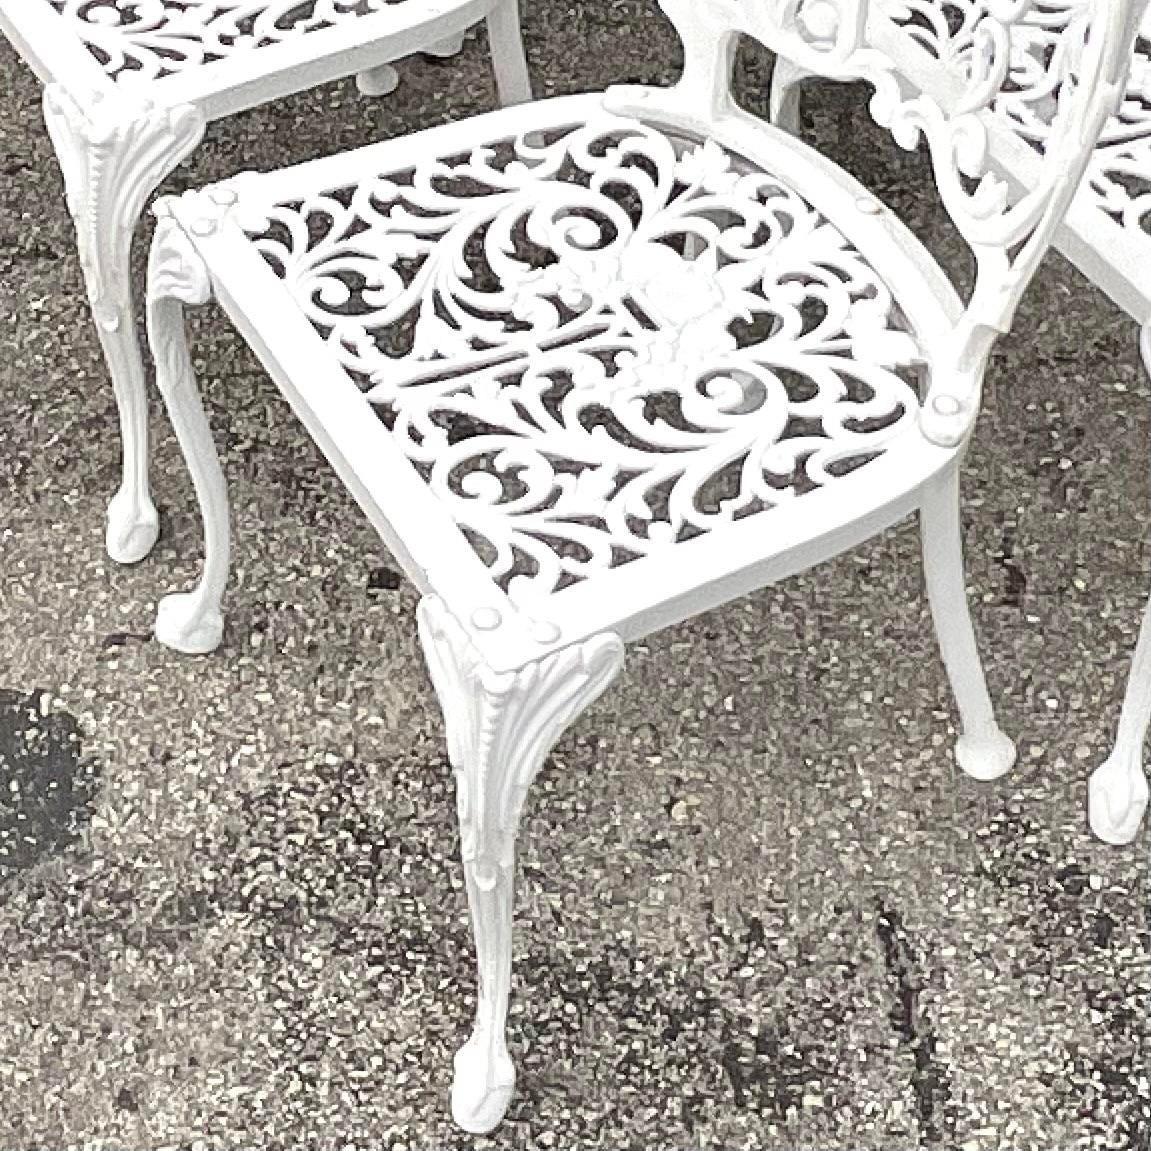 American Vintage Coastal Wrought Iron Garden Dining Chairs After Arthur Court - Set of 8